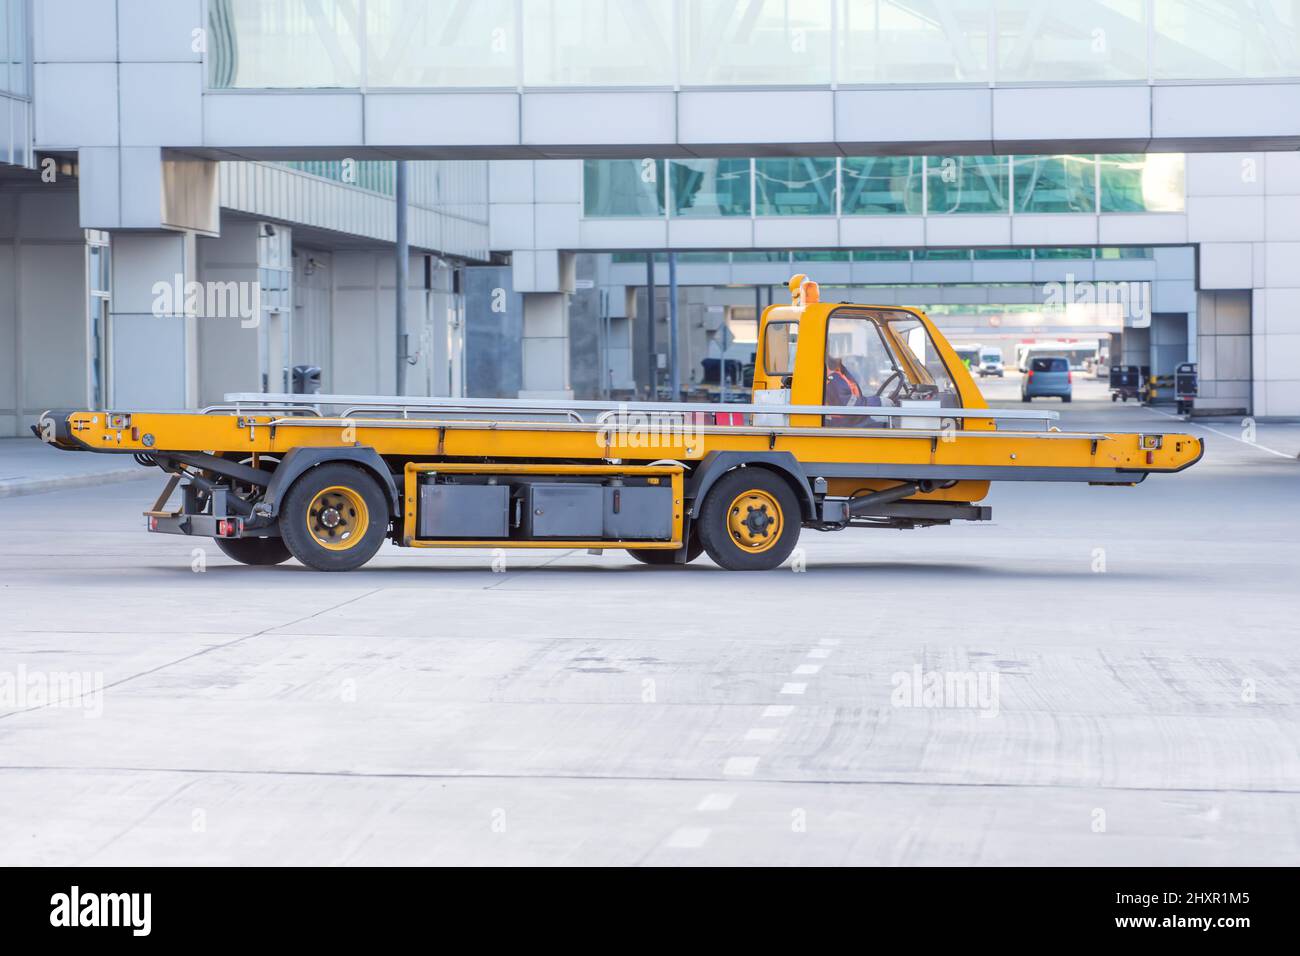 Cargo equipment car loader for luggage in the airport hub Stock Photo